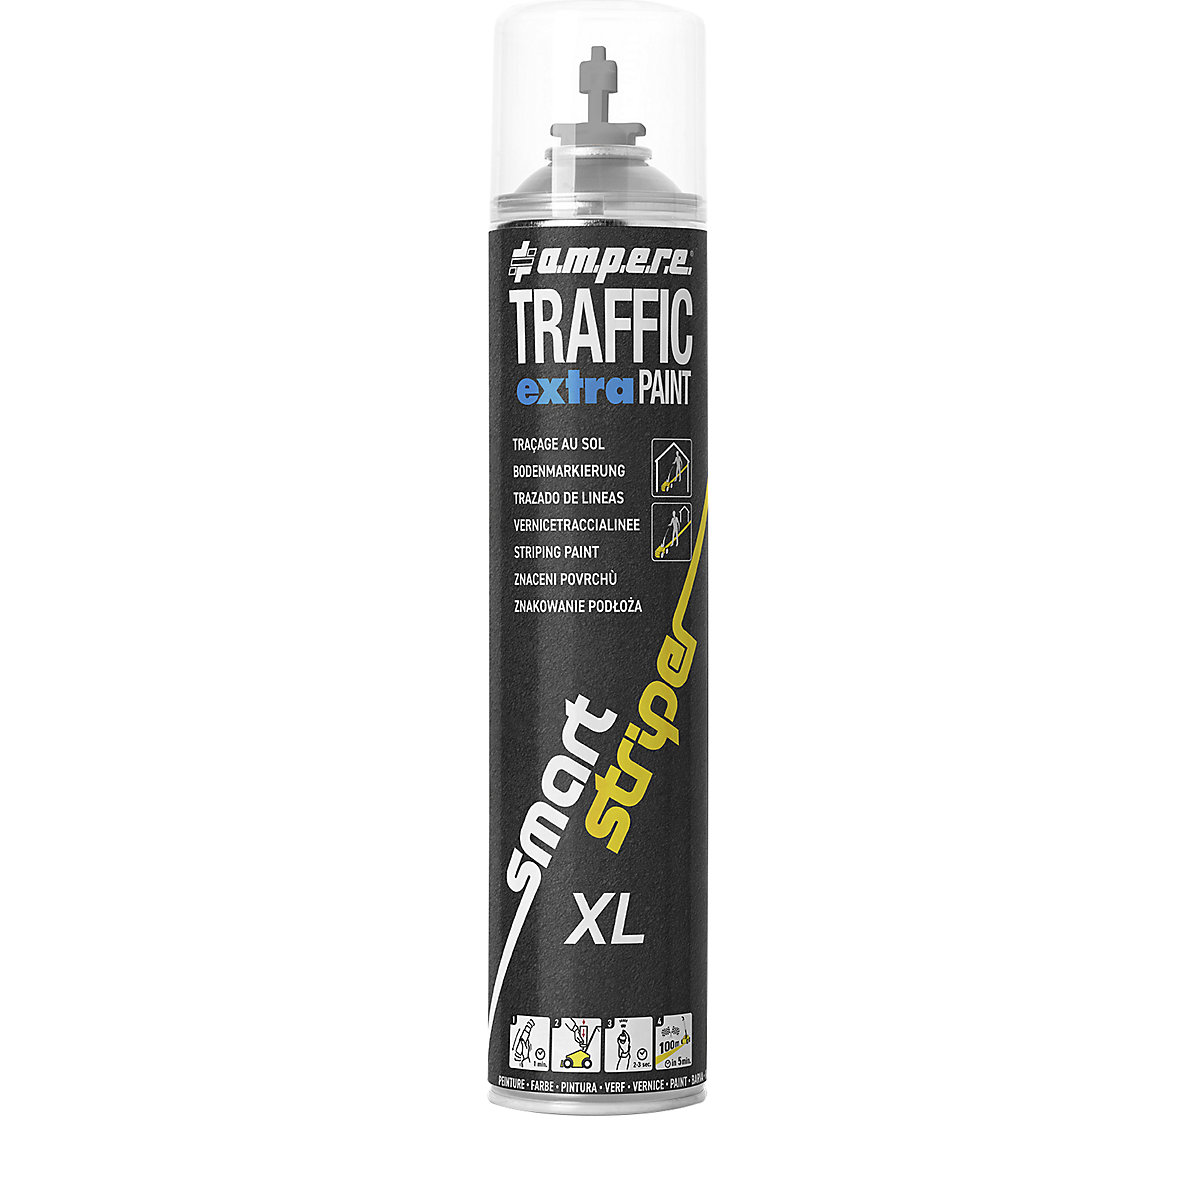 Vernice traccialinee Traffic extra Paint® XL - Ampere